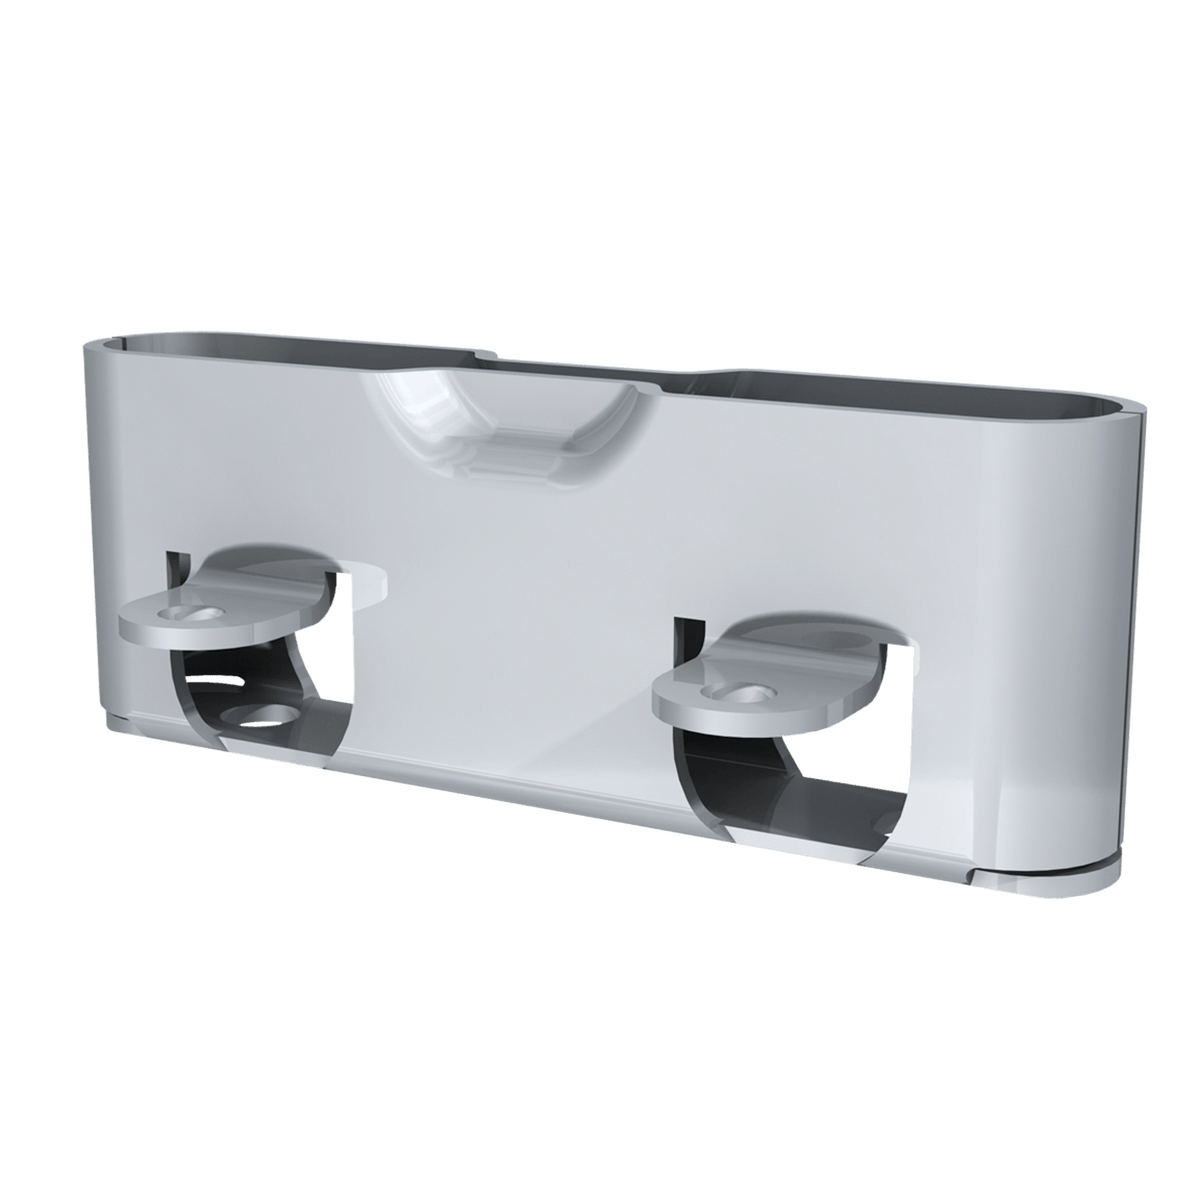 Southco Shallow Tab Roto-Lock - Receptacle - R2-0257-02 perspective view